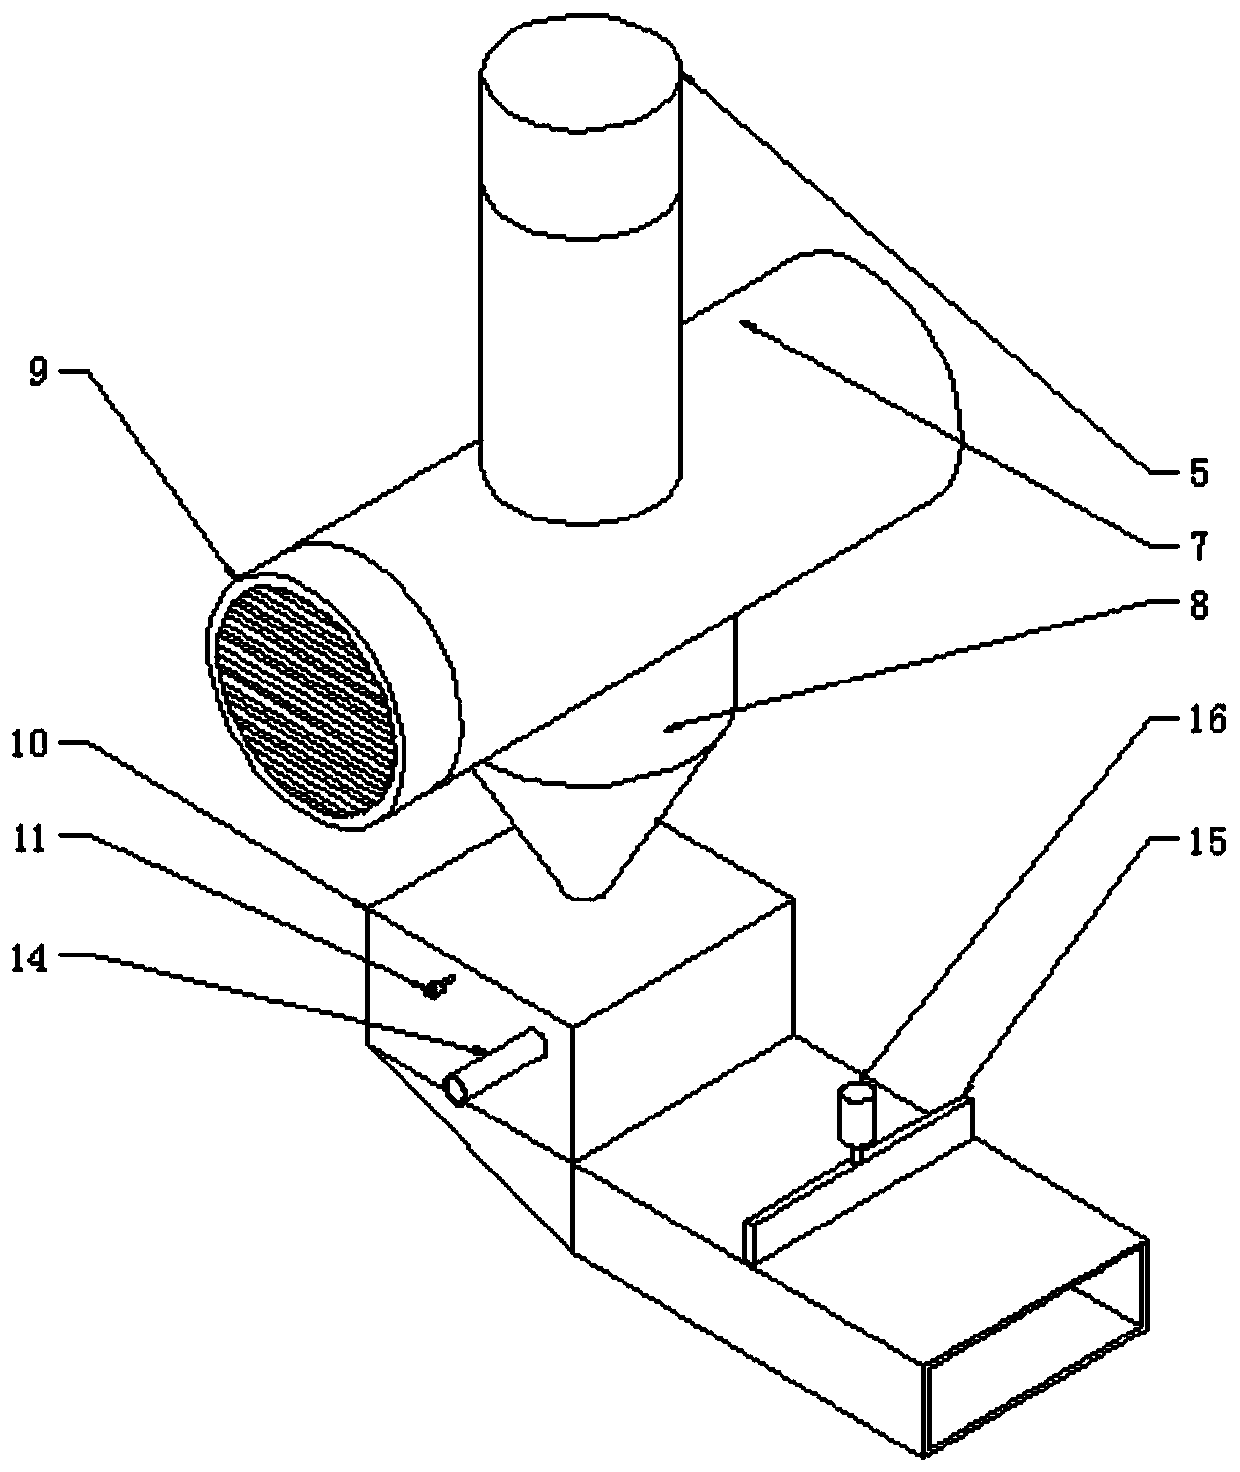 A cleaning and lifting device and method for a grain conveyor